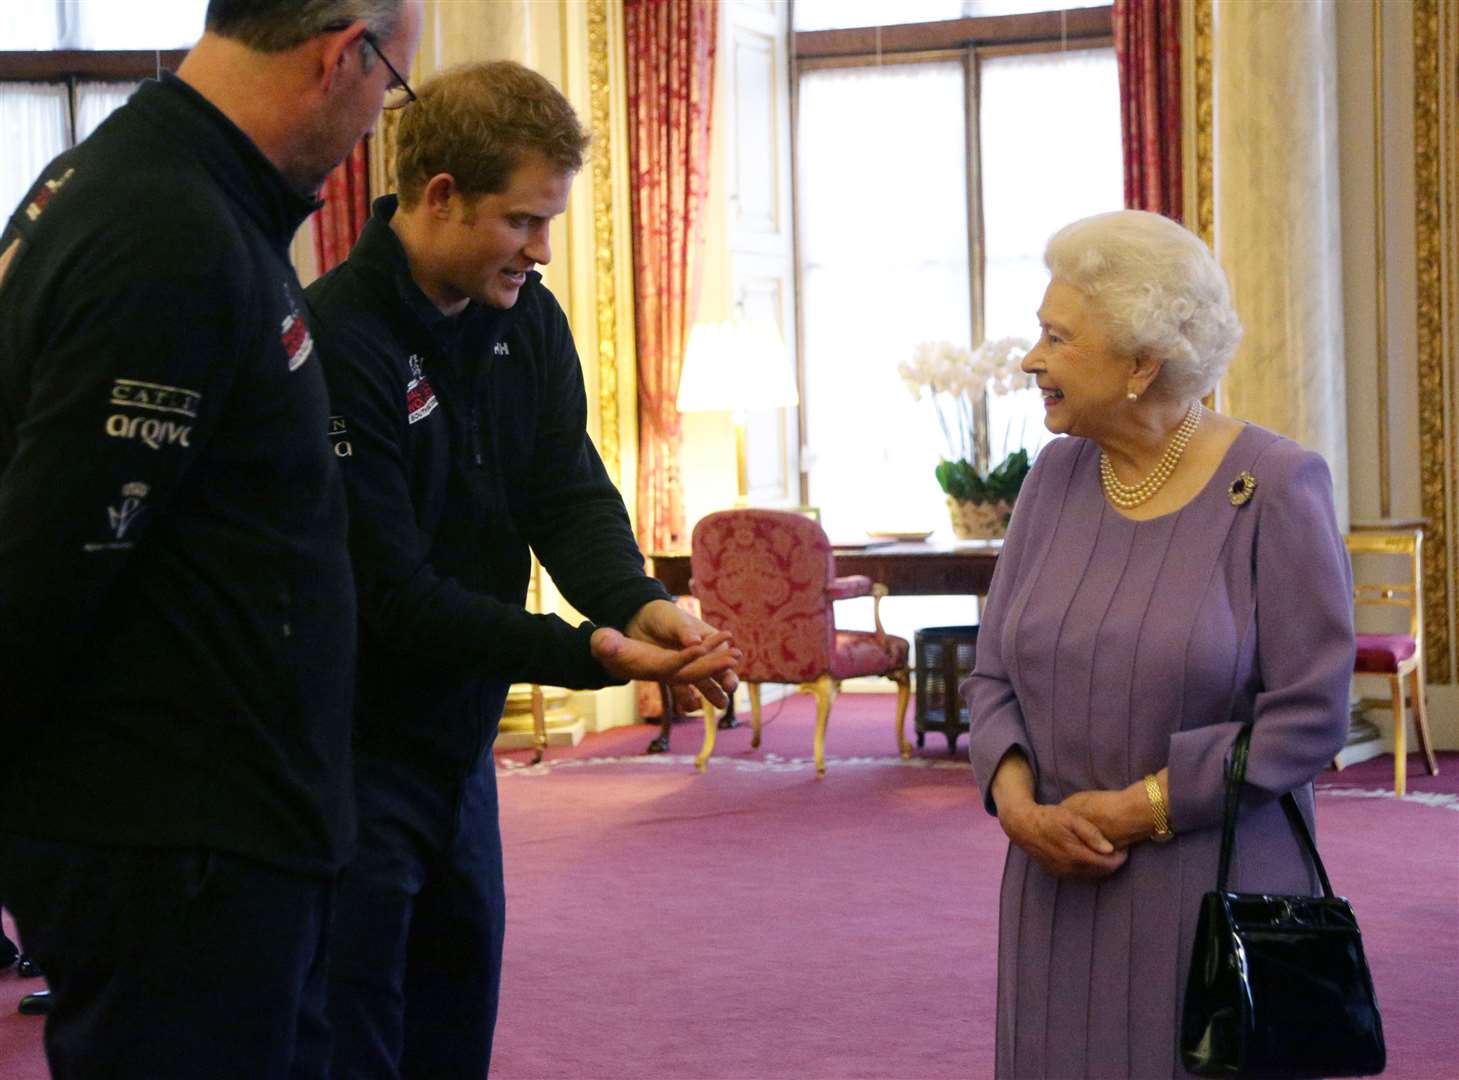 Harry and the Queen during a reception to meet teams of wounded servicemen and women (Yui Mok/PA)